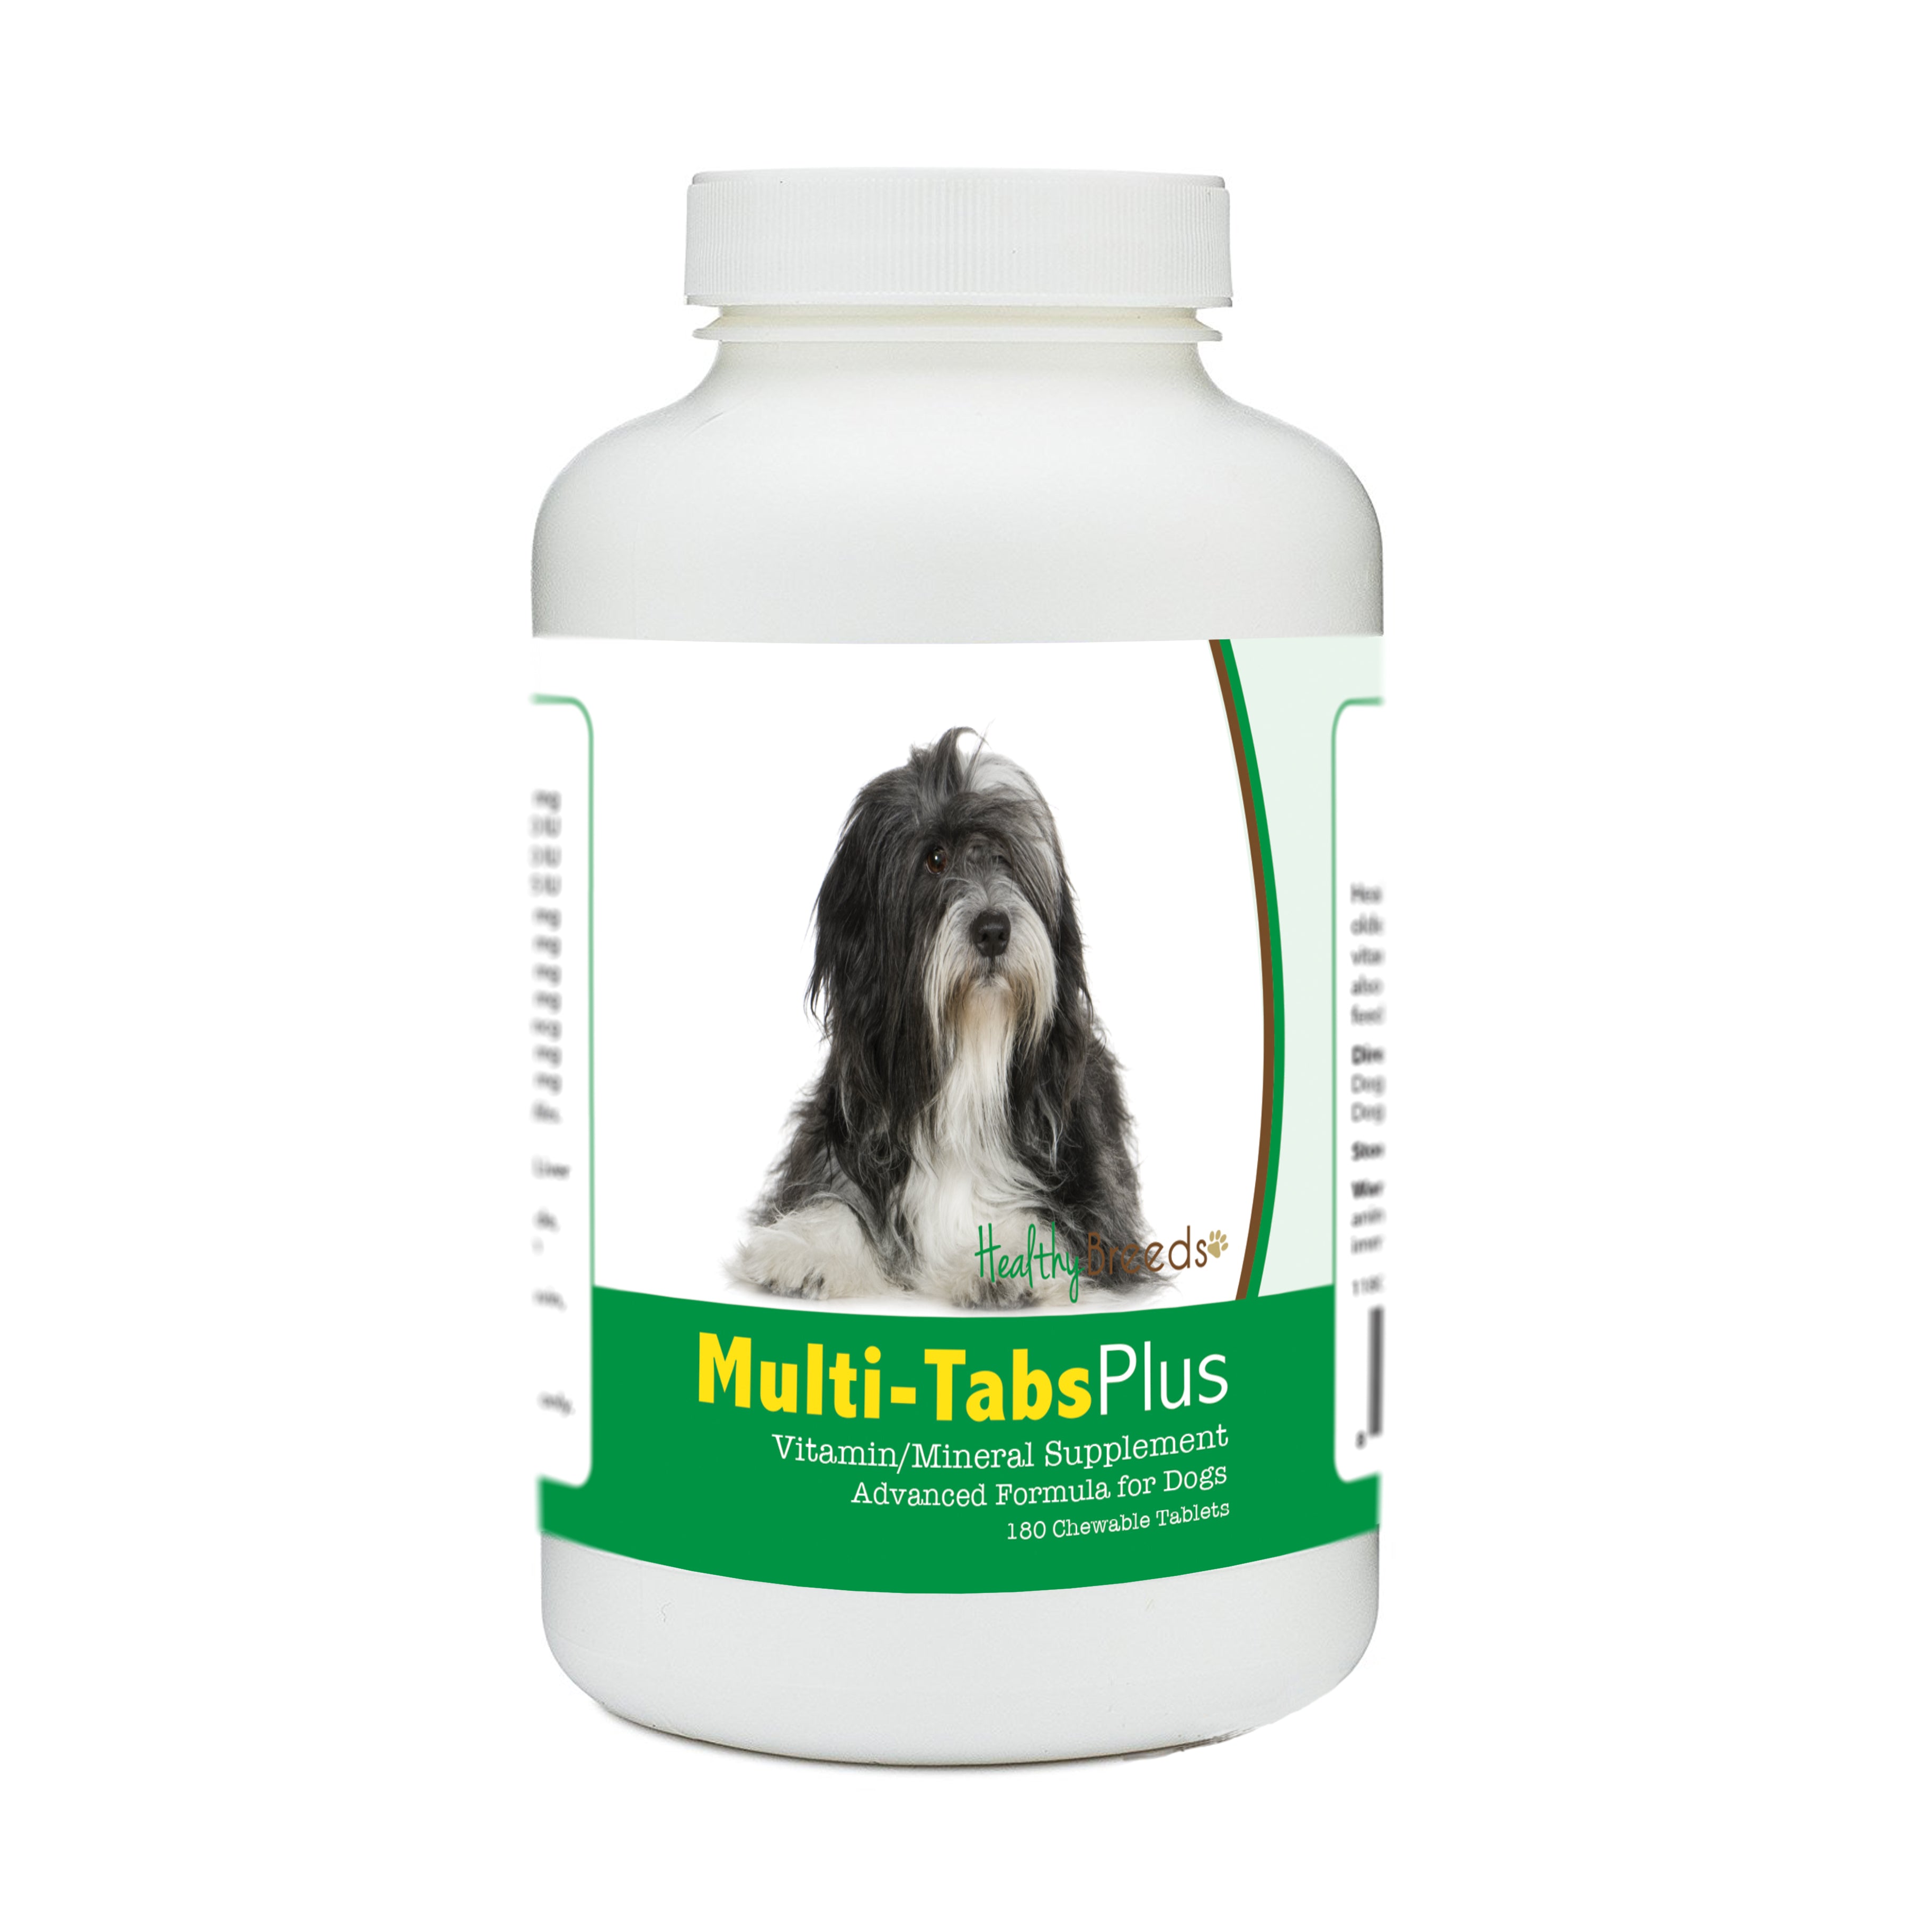 Lhasa Apso Multi-Tabs Plus Chewable Tablets 180 Count